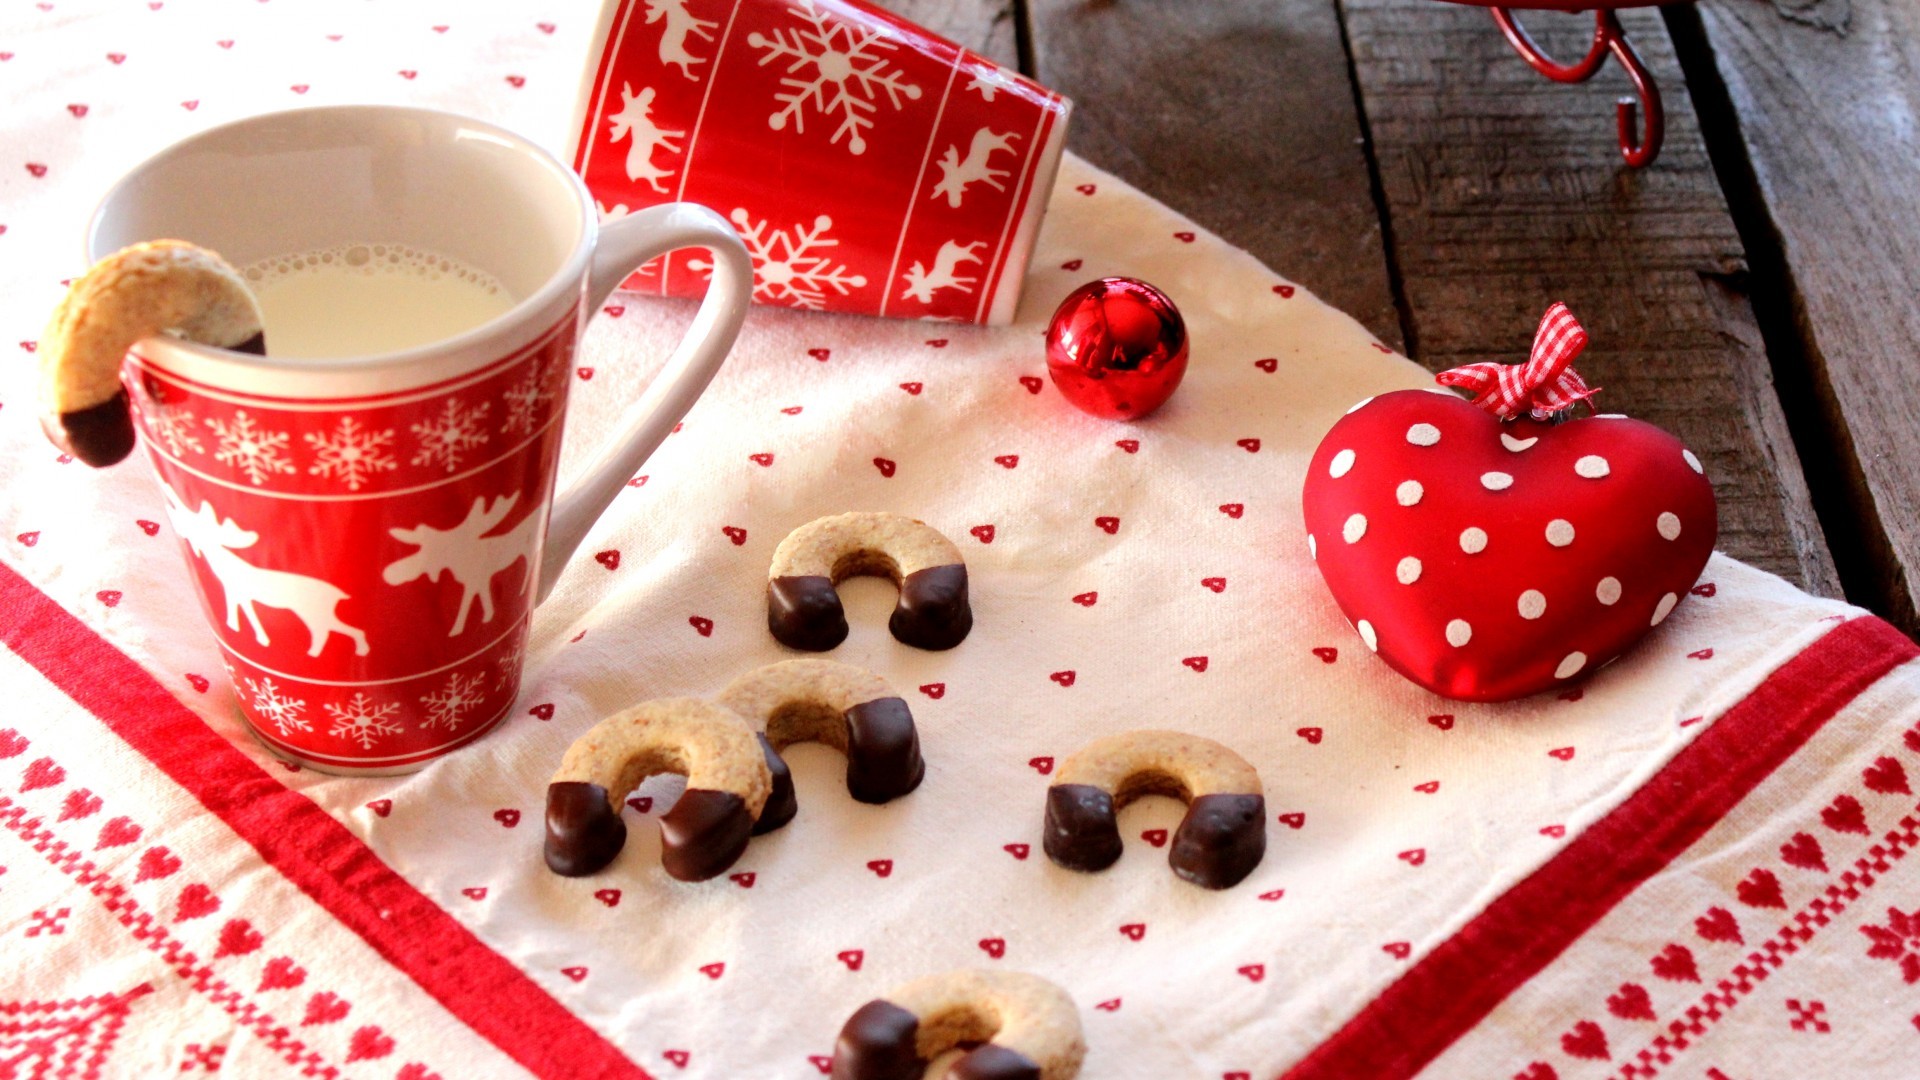 General 1920x1080 Christmas cup sweets pastries food holiday winter